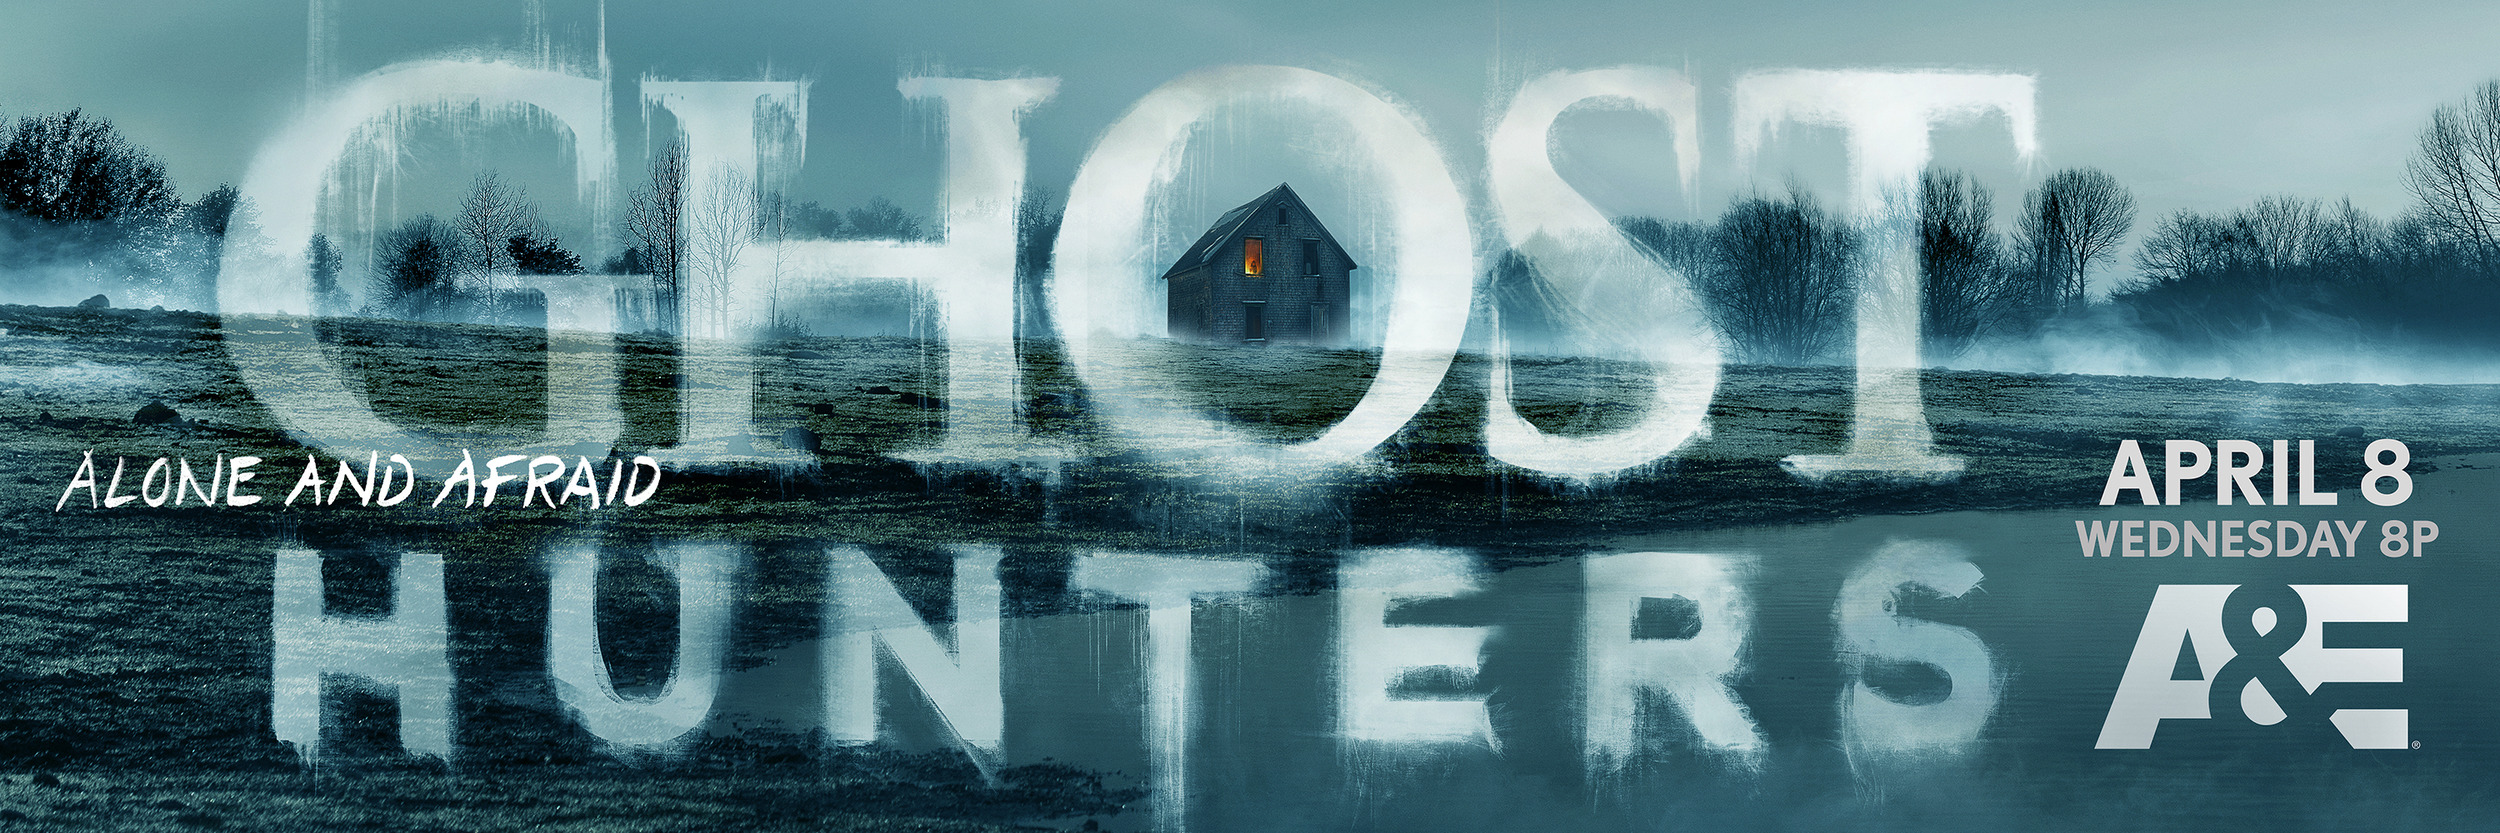 Mega Sized TV Poster Image for Ghost Hunters (#4 of 4)